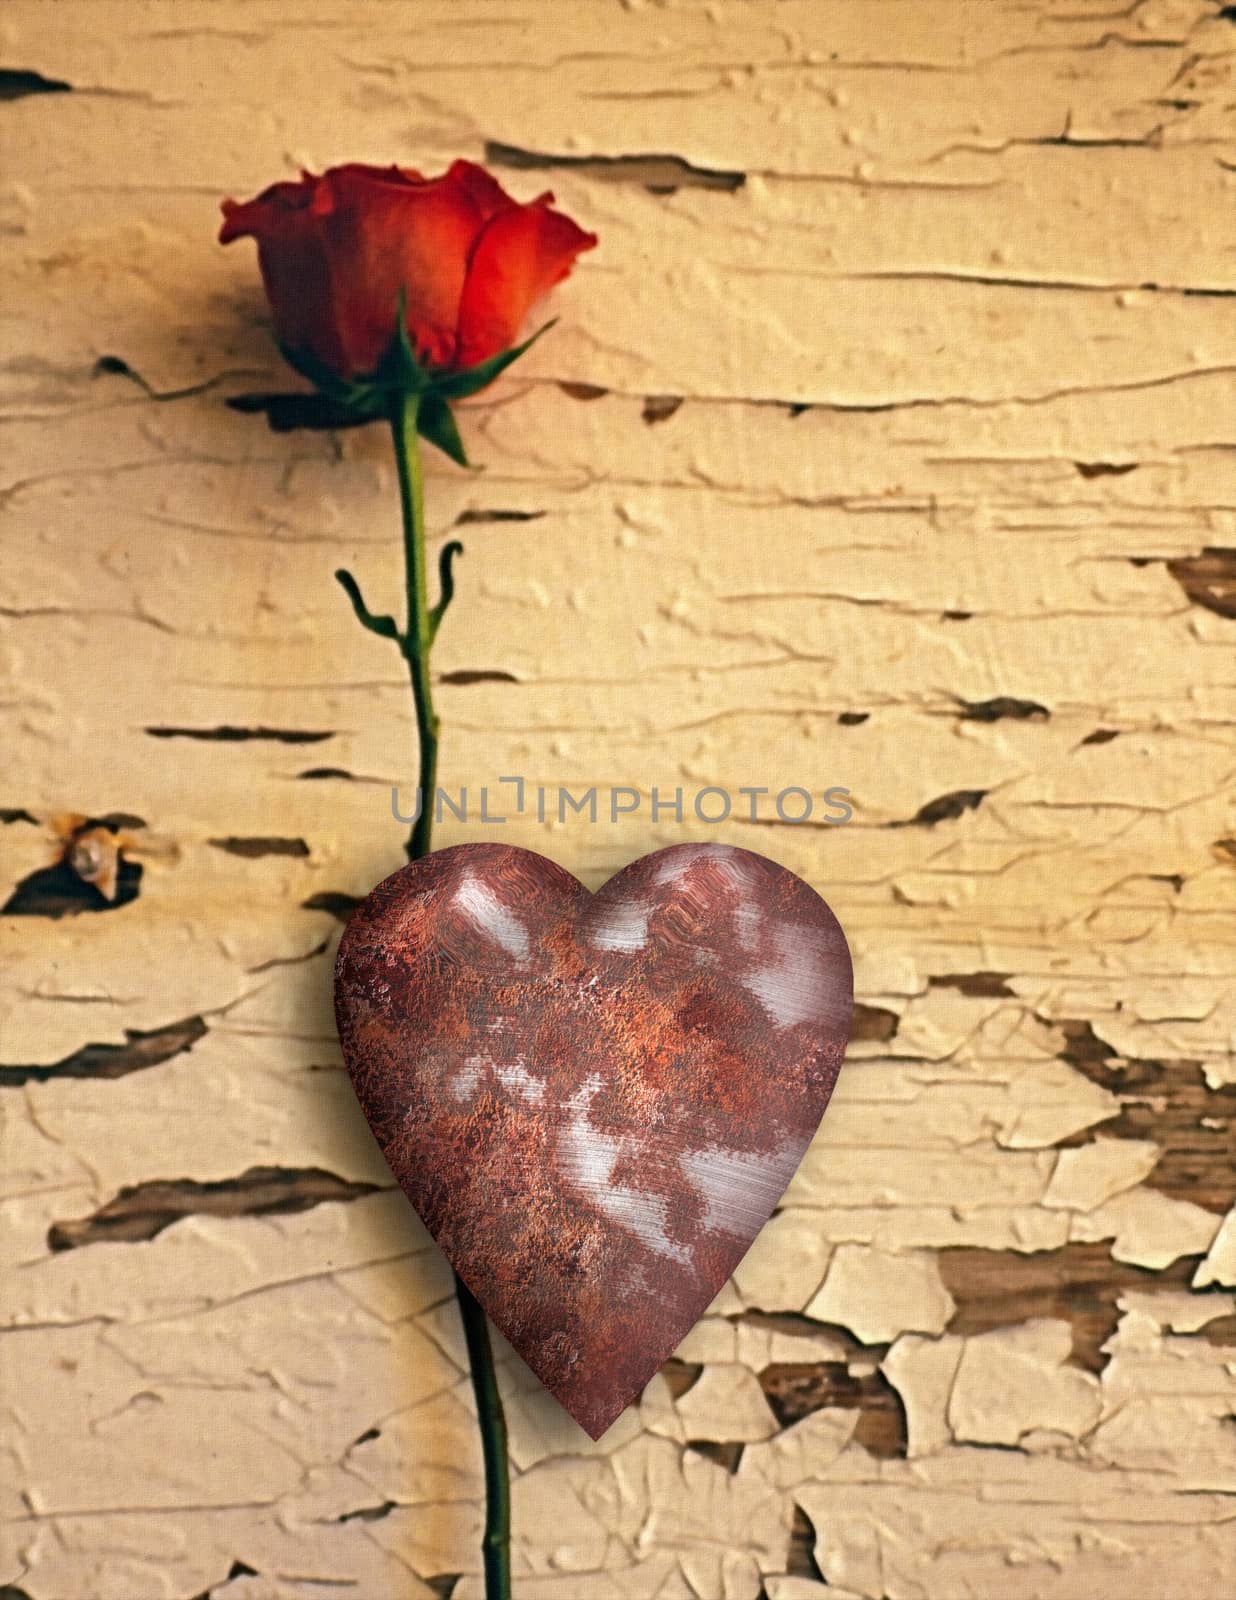 Symbolism. Rusted love. Red rose and metal heart